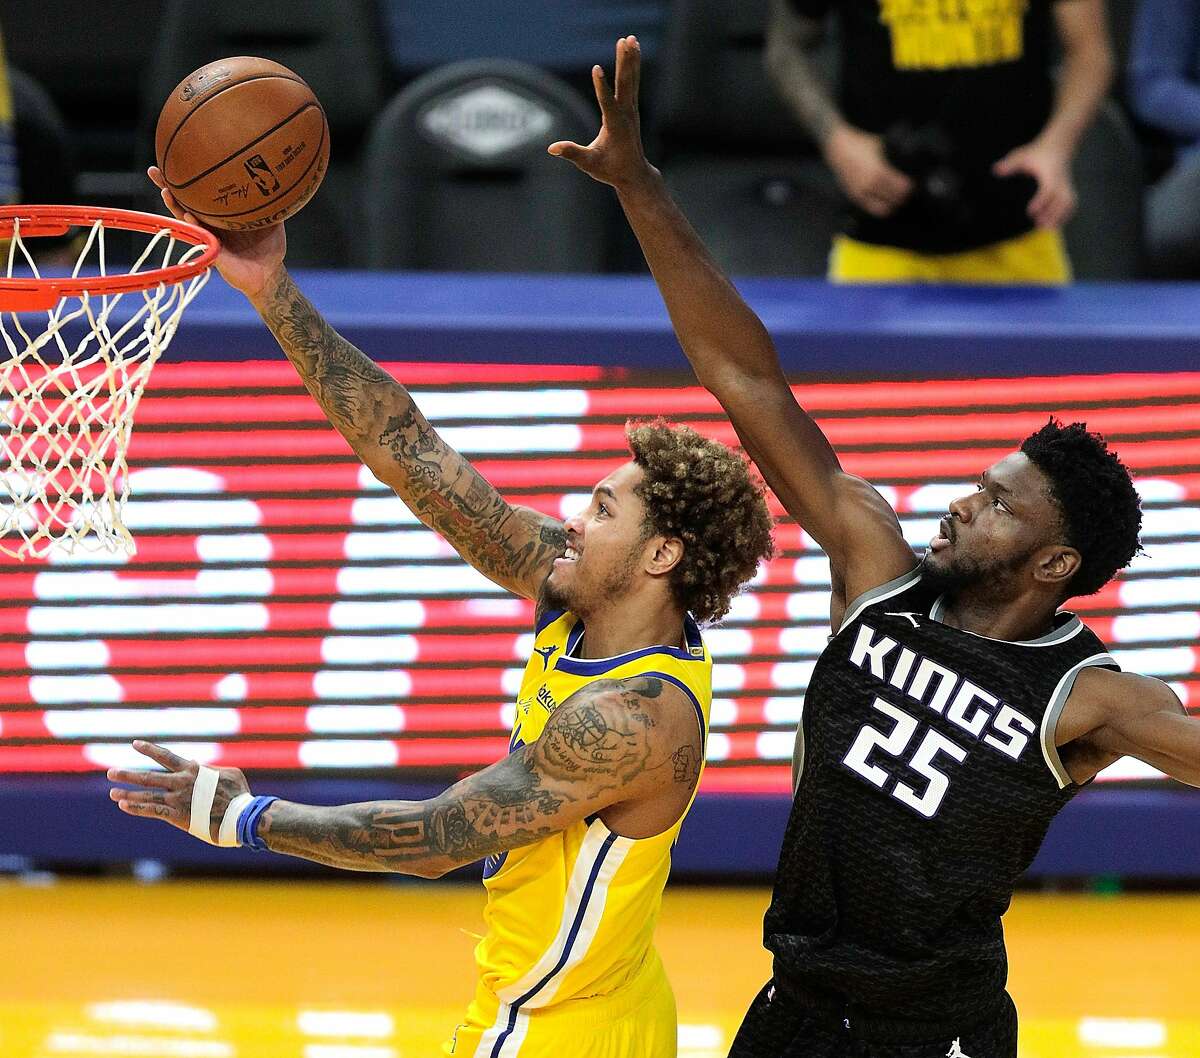 The Warriors’ Kelly Oubre Jr. drives past Sacramento’s Chimezie Metu for a layup attempt during the first half at Chase Center.